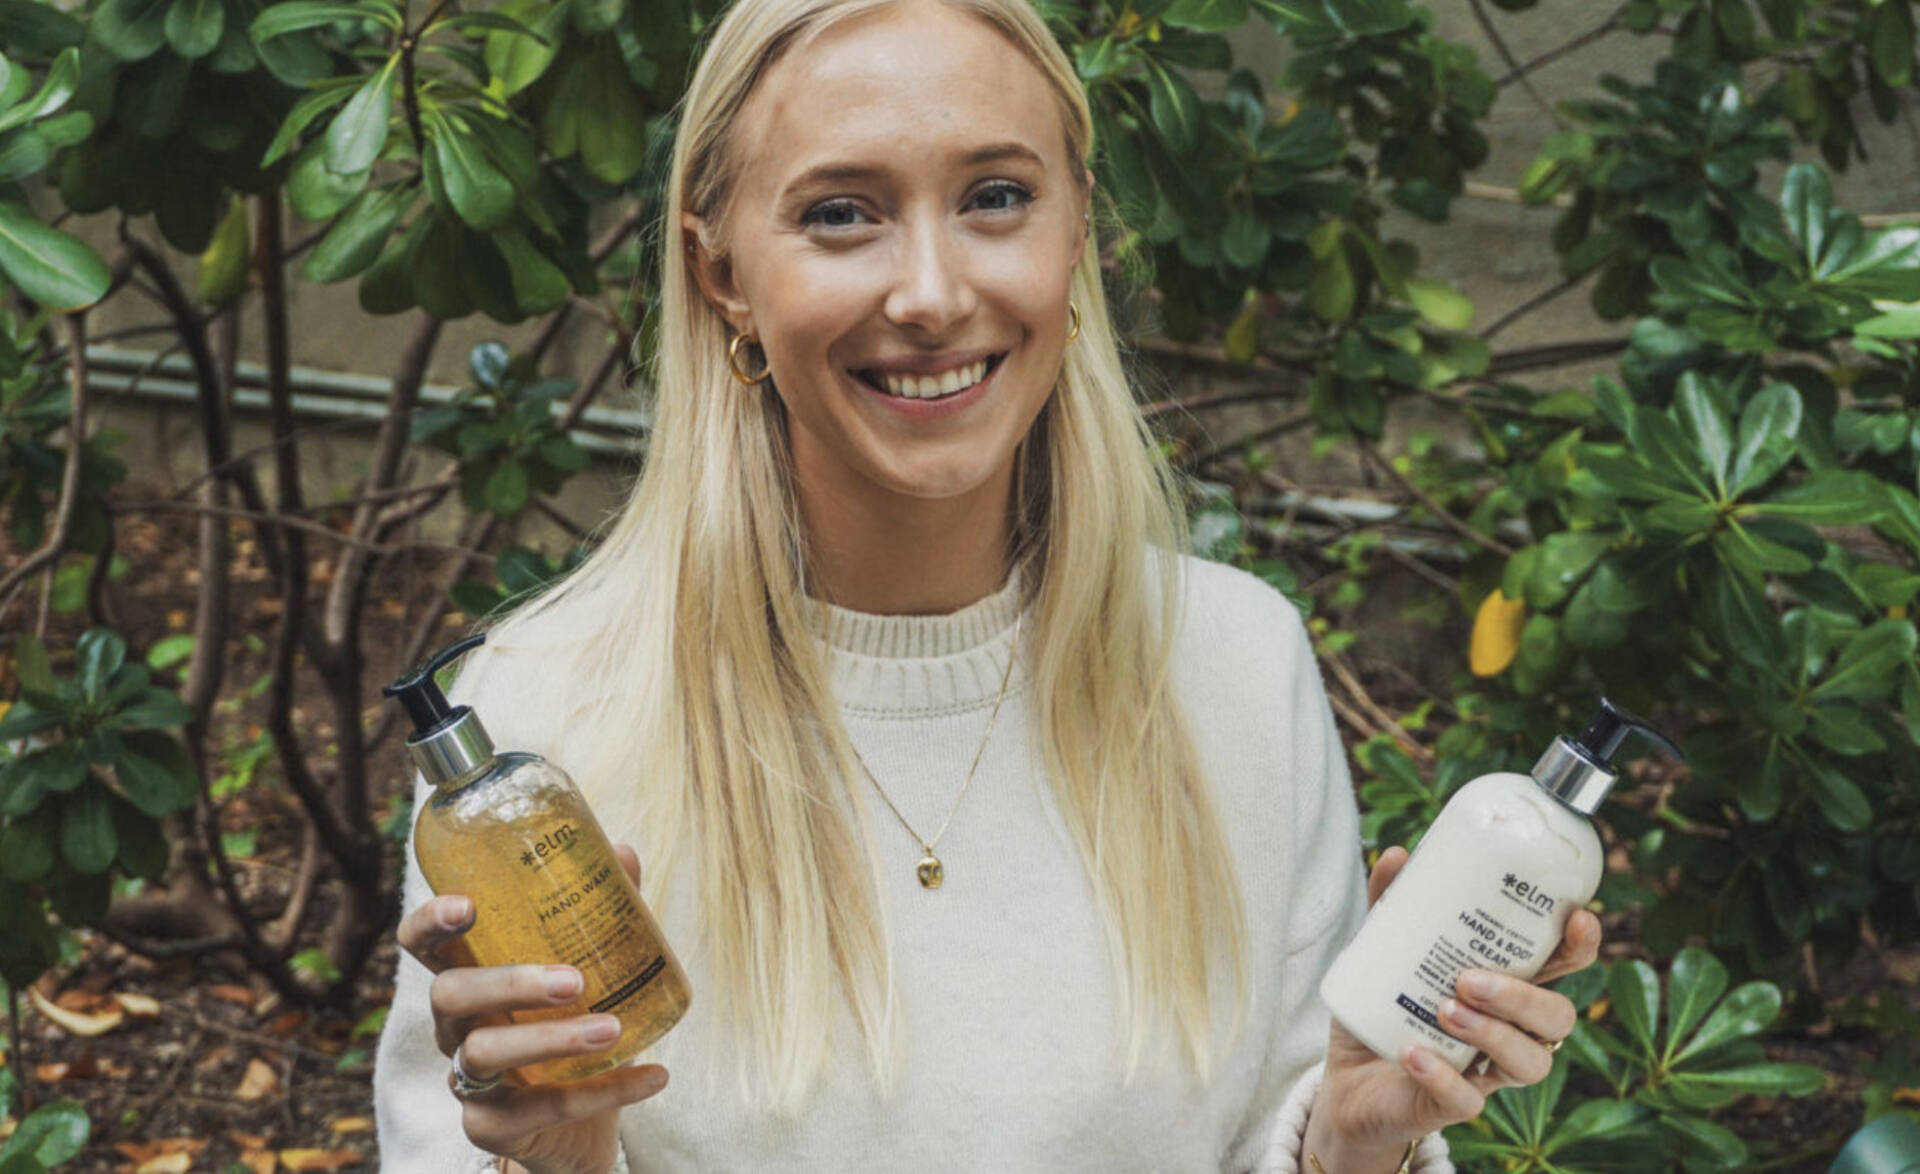 OUR INTERVIEW WITH SINE BRYNESTAD STOKKE, CEO OF ELM ORGANICS